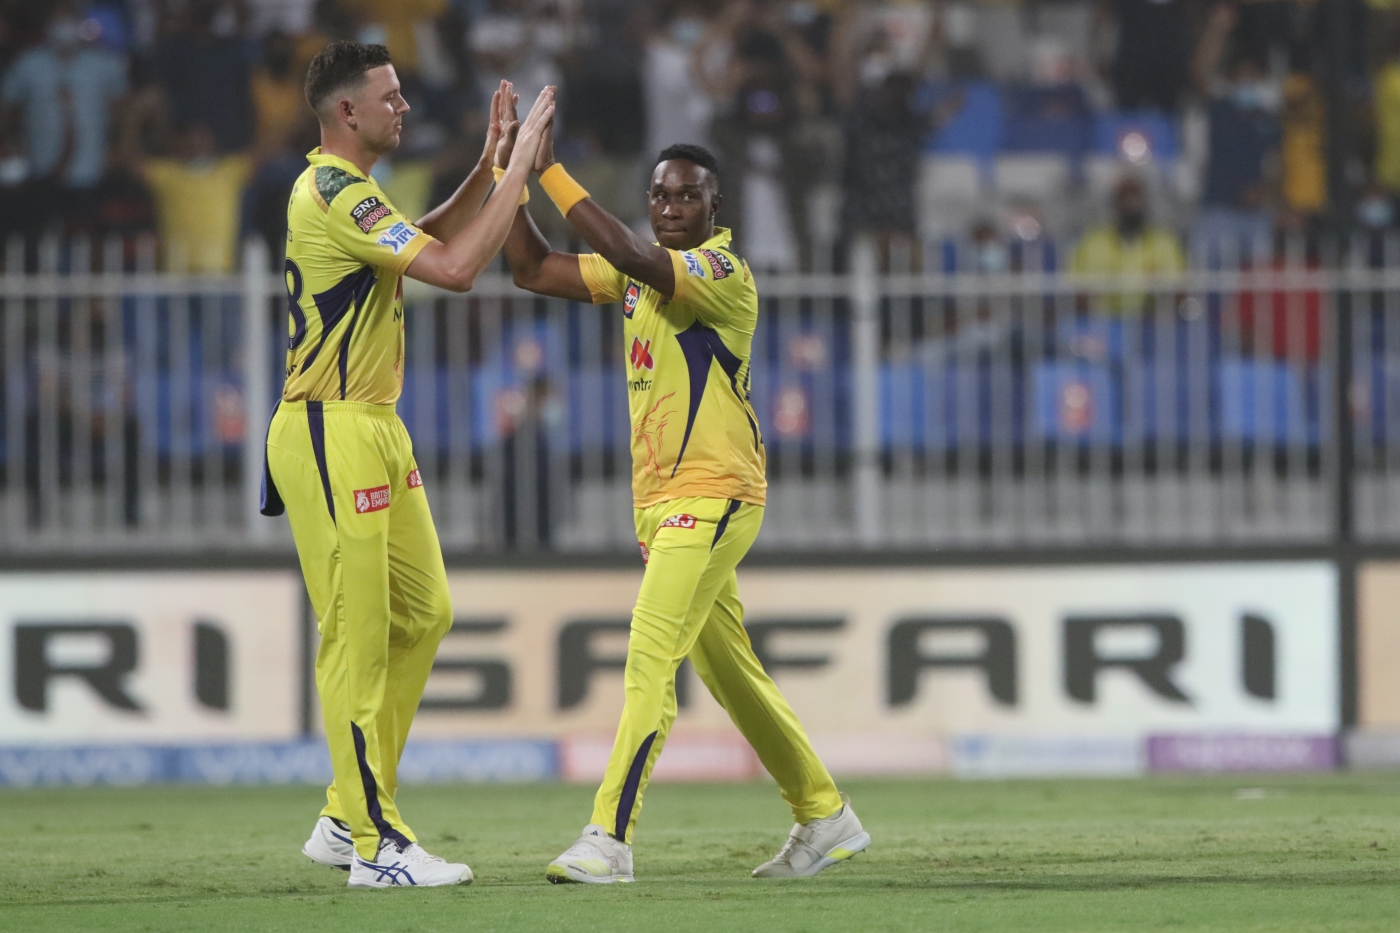 Dwayne Bravo will be perfect for CSK in Sharjah | BCCI-IPL